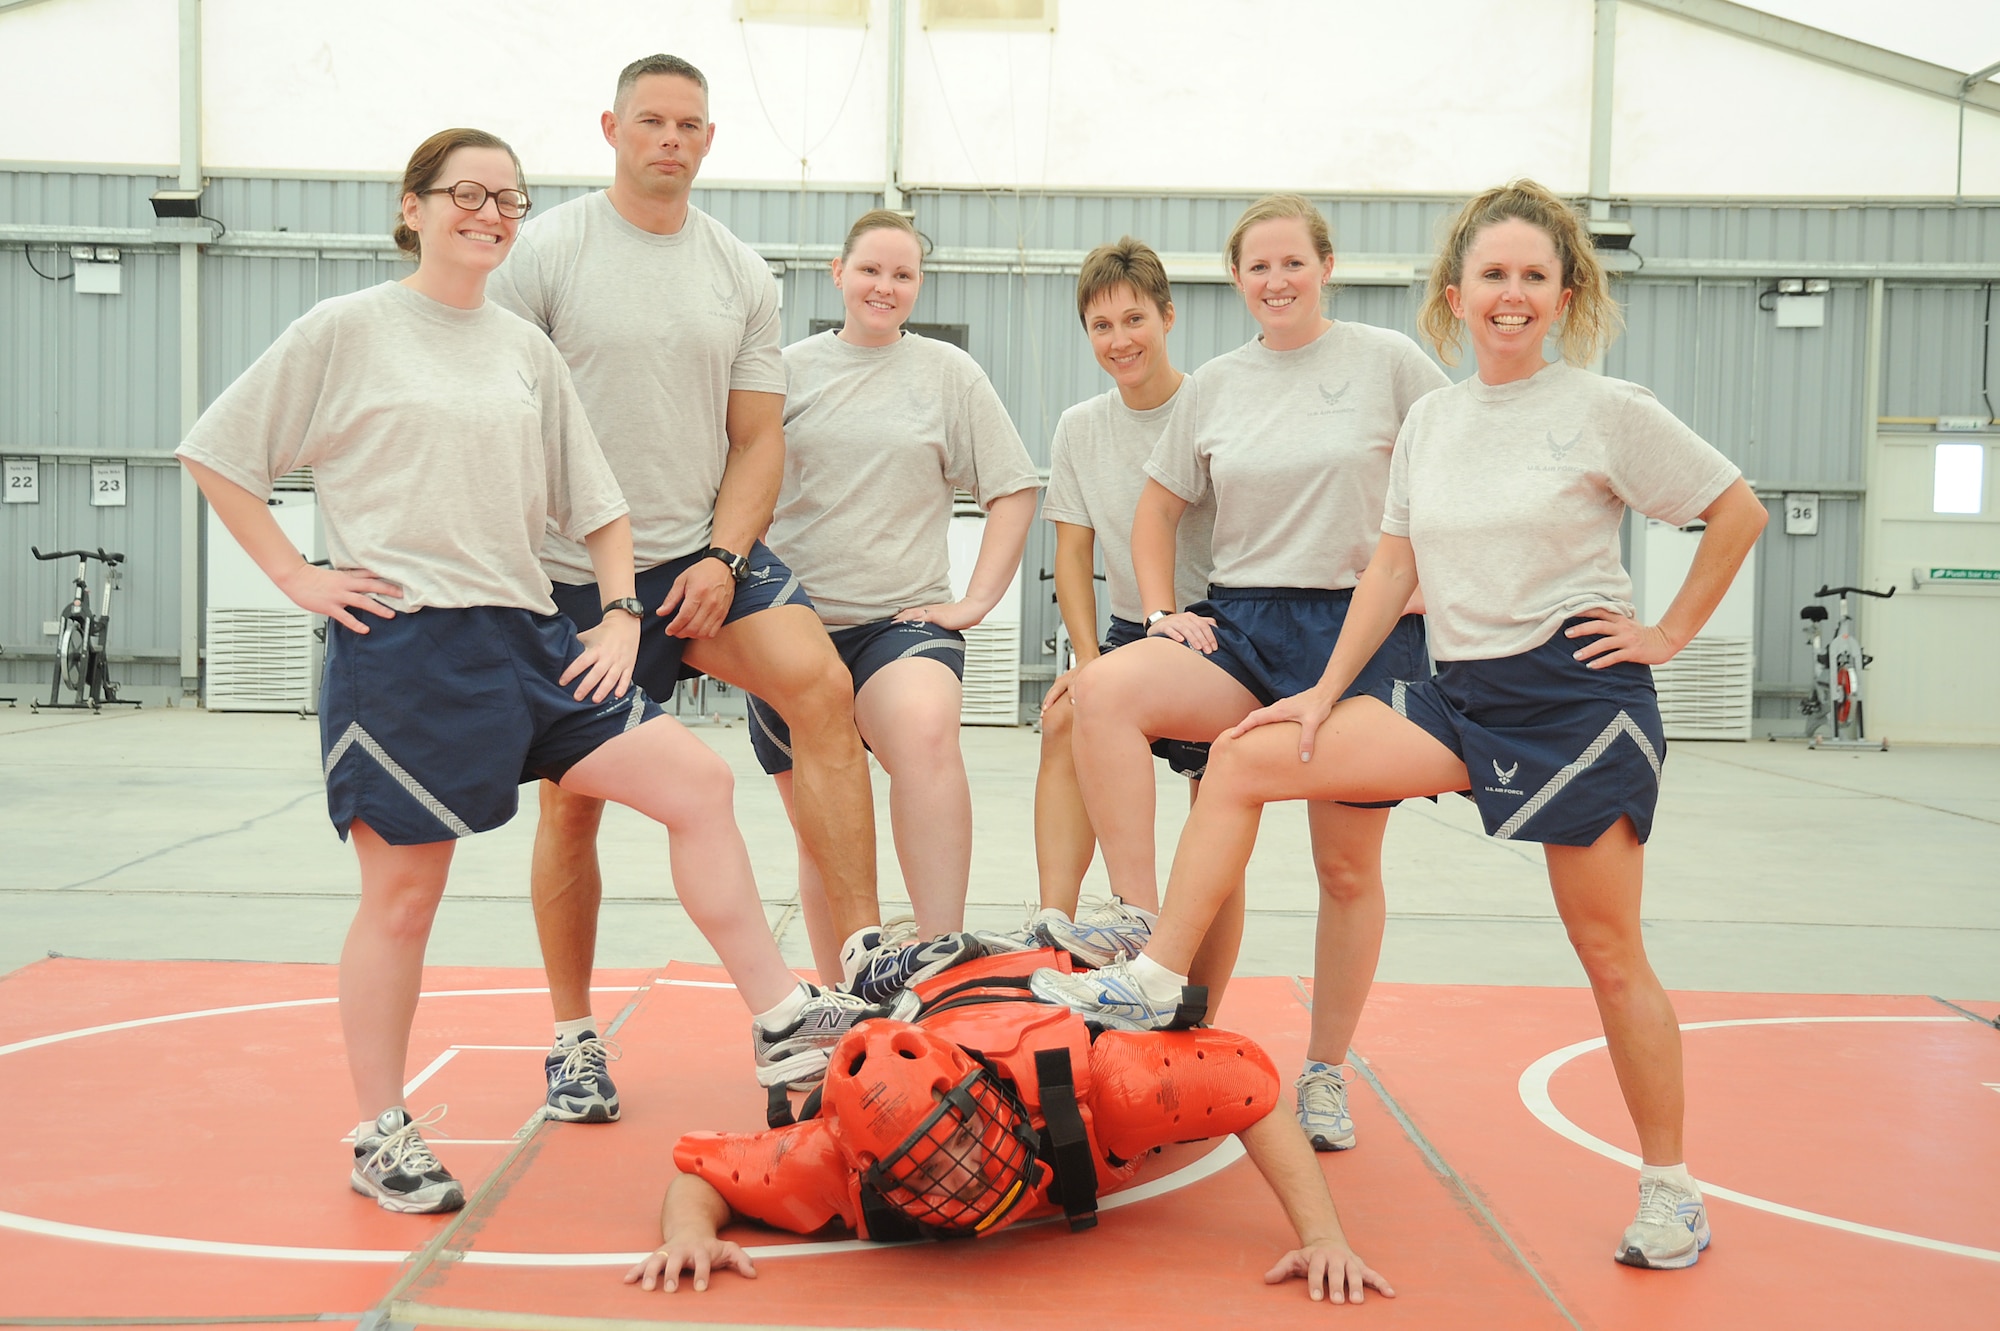 Instructors Tech. Sgt. Rob Goddard, 380th Expeditionary Security Forces Squadron (2nd from the left) and Mr. Rick Baldwin, a Northrop Grumman contractor (red man suit) pose with their students after a self-defense training class, April 18 at an undisclosed location in Southwest Asia. The Sexual Assault Response Coordinator (SARC) sponsored the training that gave students the chance to learn techniques to defend themselves from attack. Sergeant Goddard is deployed from Eglin AFB, Fla. and hails from Harrisville, Mich. (U.S. Air Force photo by Senior Airman Brian J. Ellis) (Released)